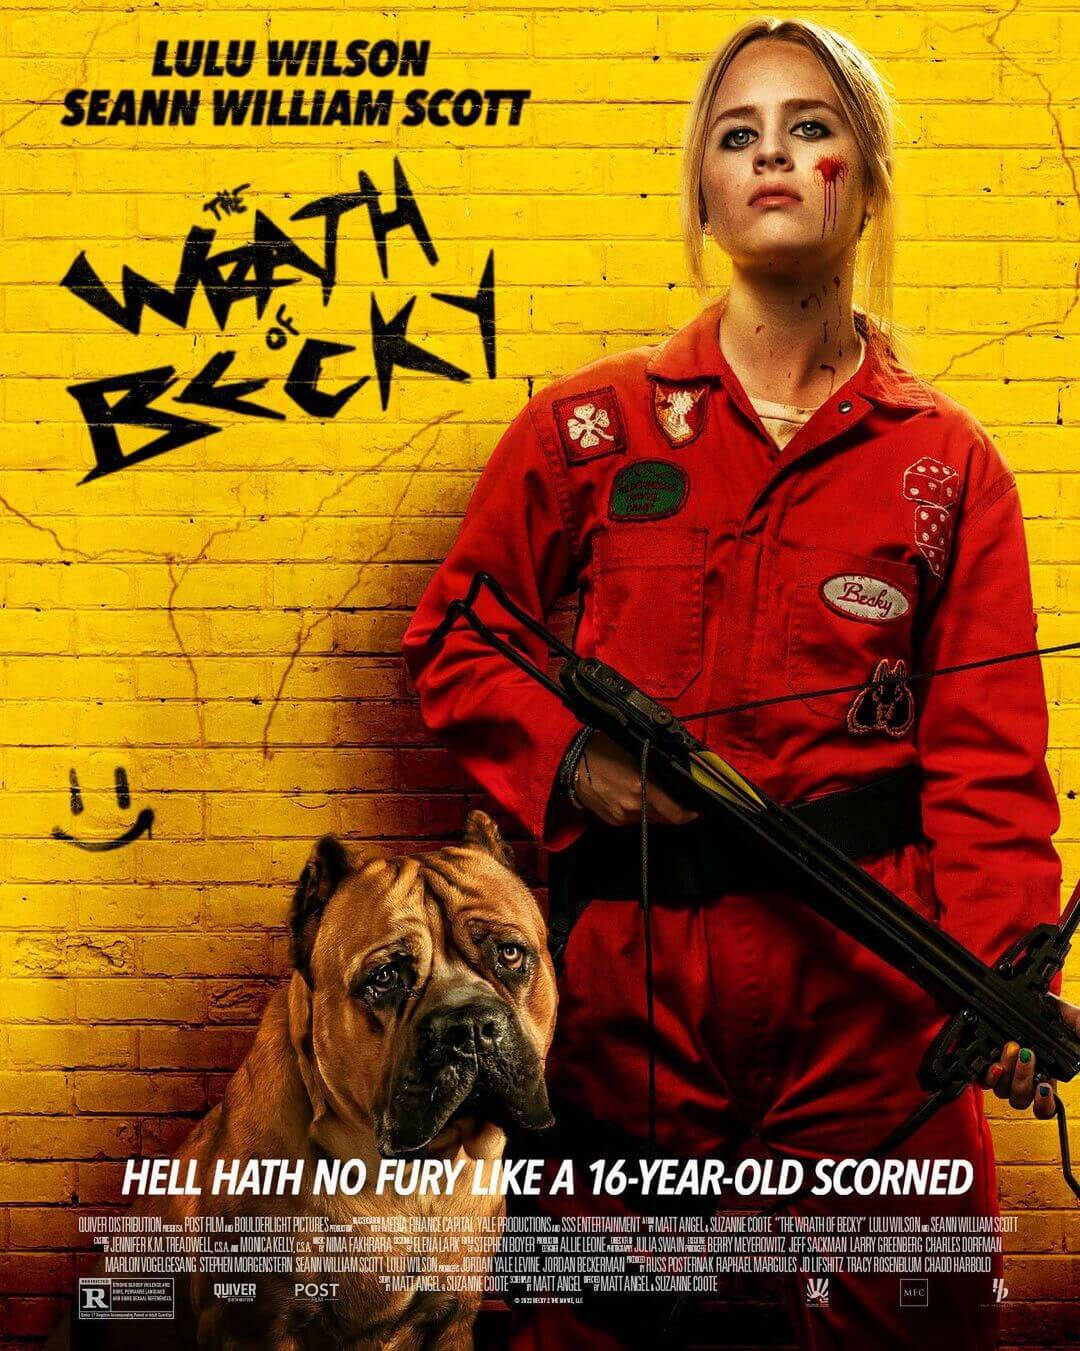 The Wrath of Becky Movie (2023) Cast, Release Date, Story, Budget